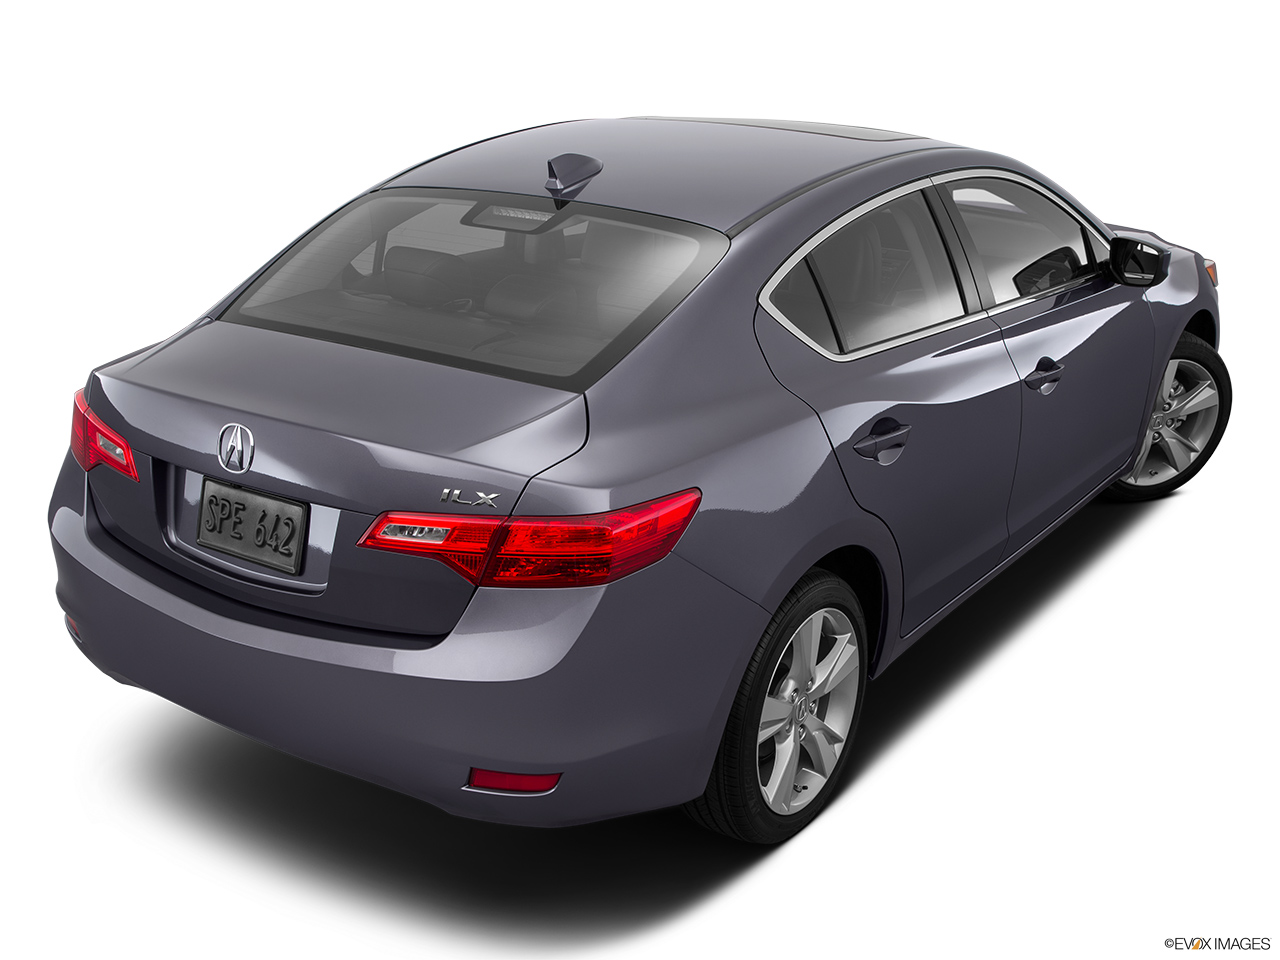 2015 Acura ILX 5-Speed Automatic Rear 3/4 angle view. 